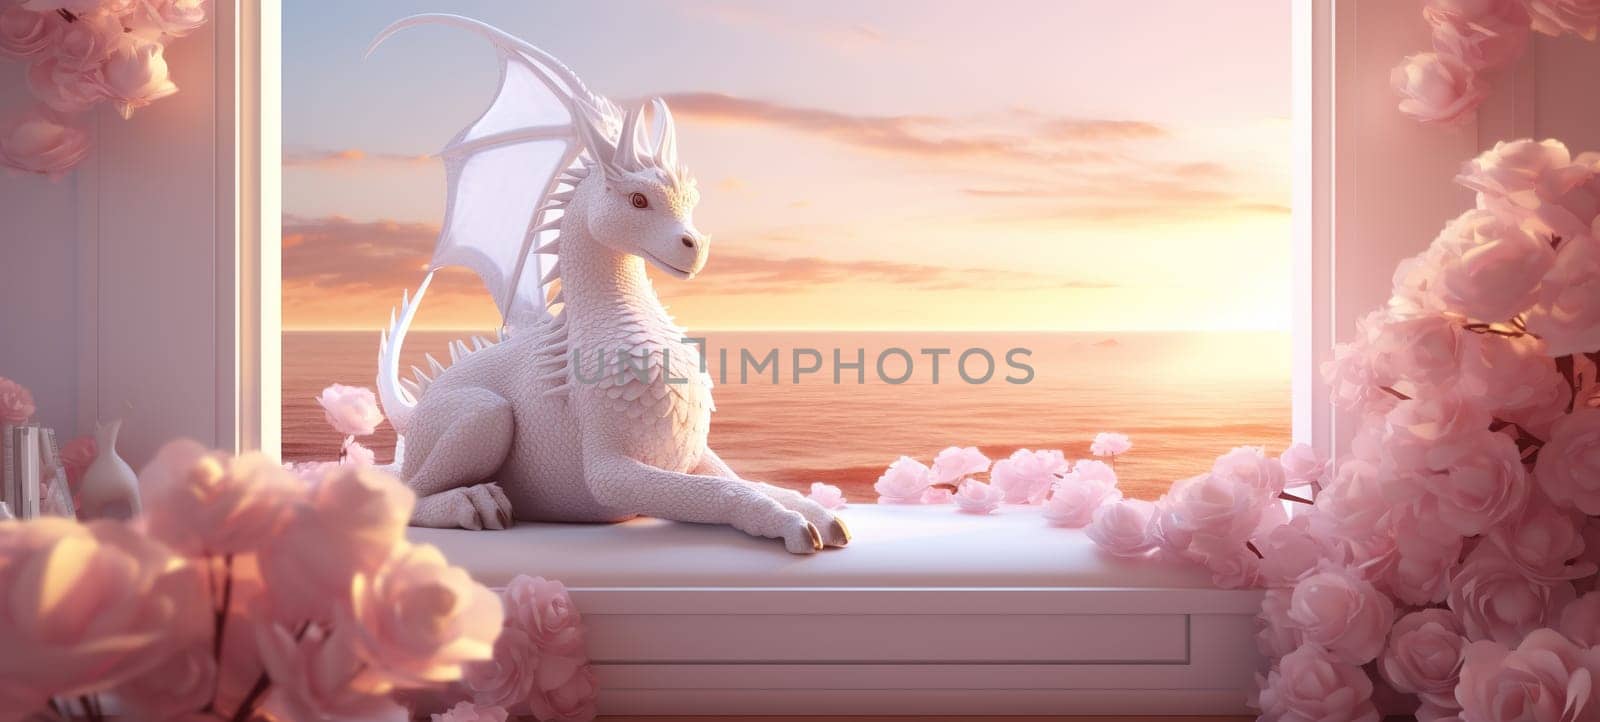 charming white dragon girl sits on the sofa in front of the window and looks at the sunset on the sea in an interior full of flowers in the style of pink unicorn,copy space,High quality illustration